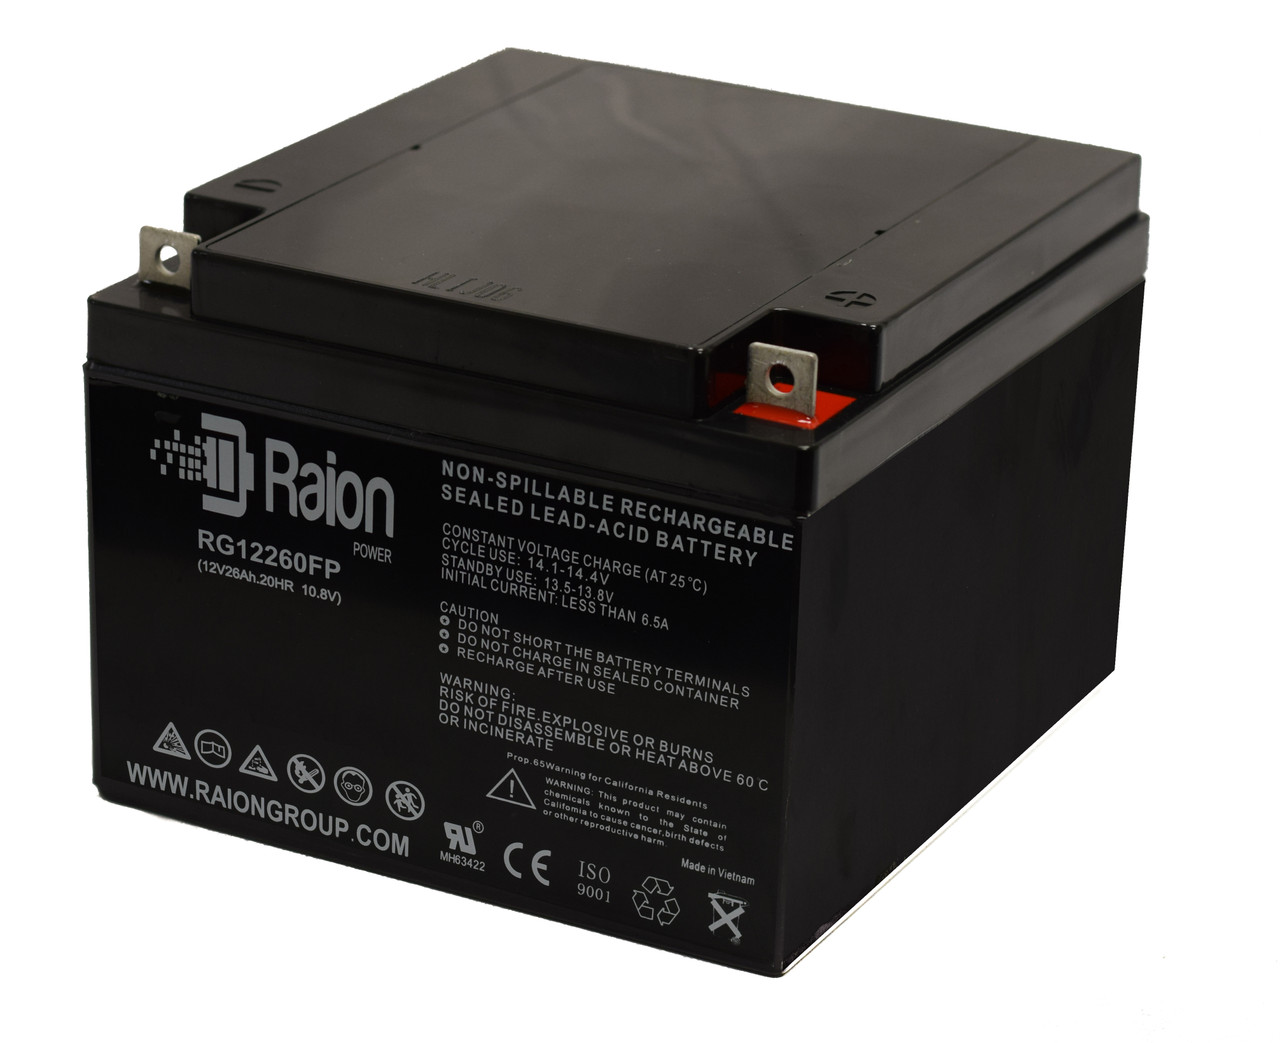 Raion Power Replacement 12V 26Ah Battery for Tempest TR24-12B - 1 Pack